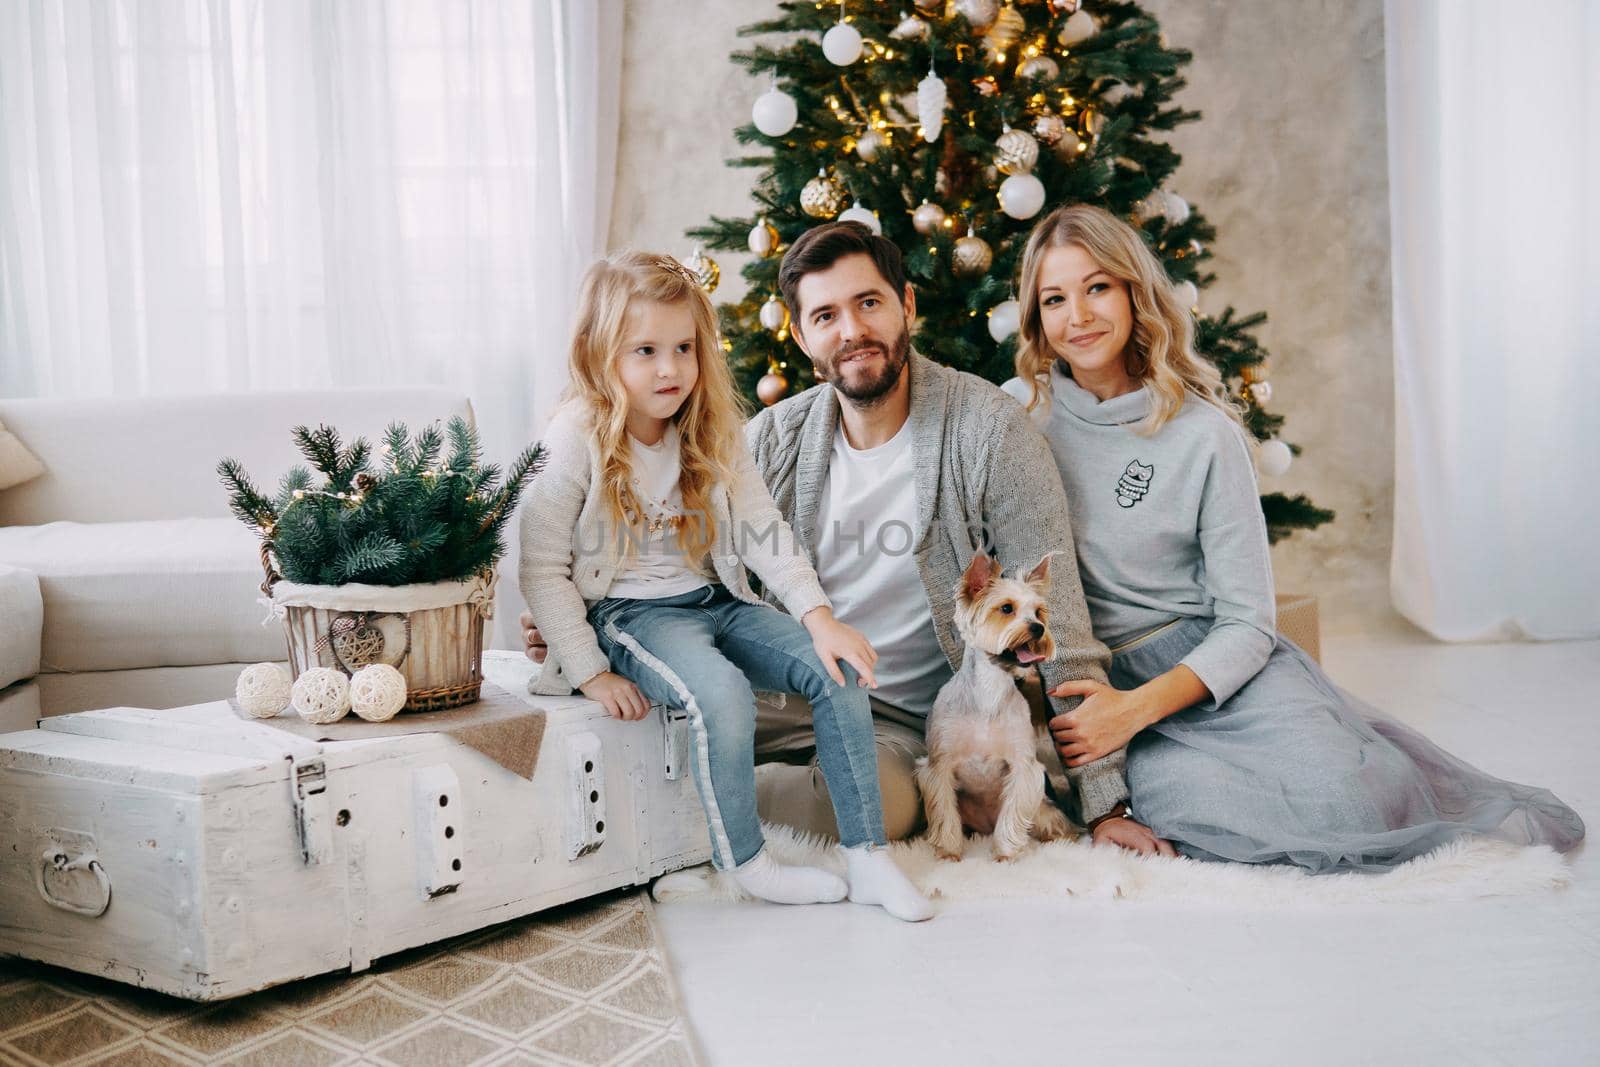 Happy family: mom, dad and pet. Family in a bright New Year's interior with a Christmas tree.